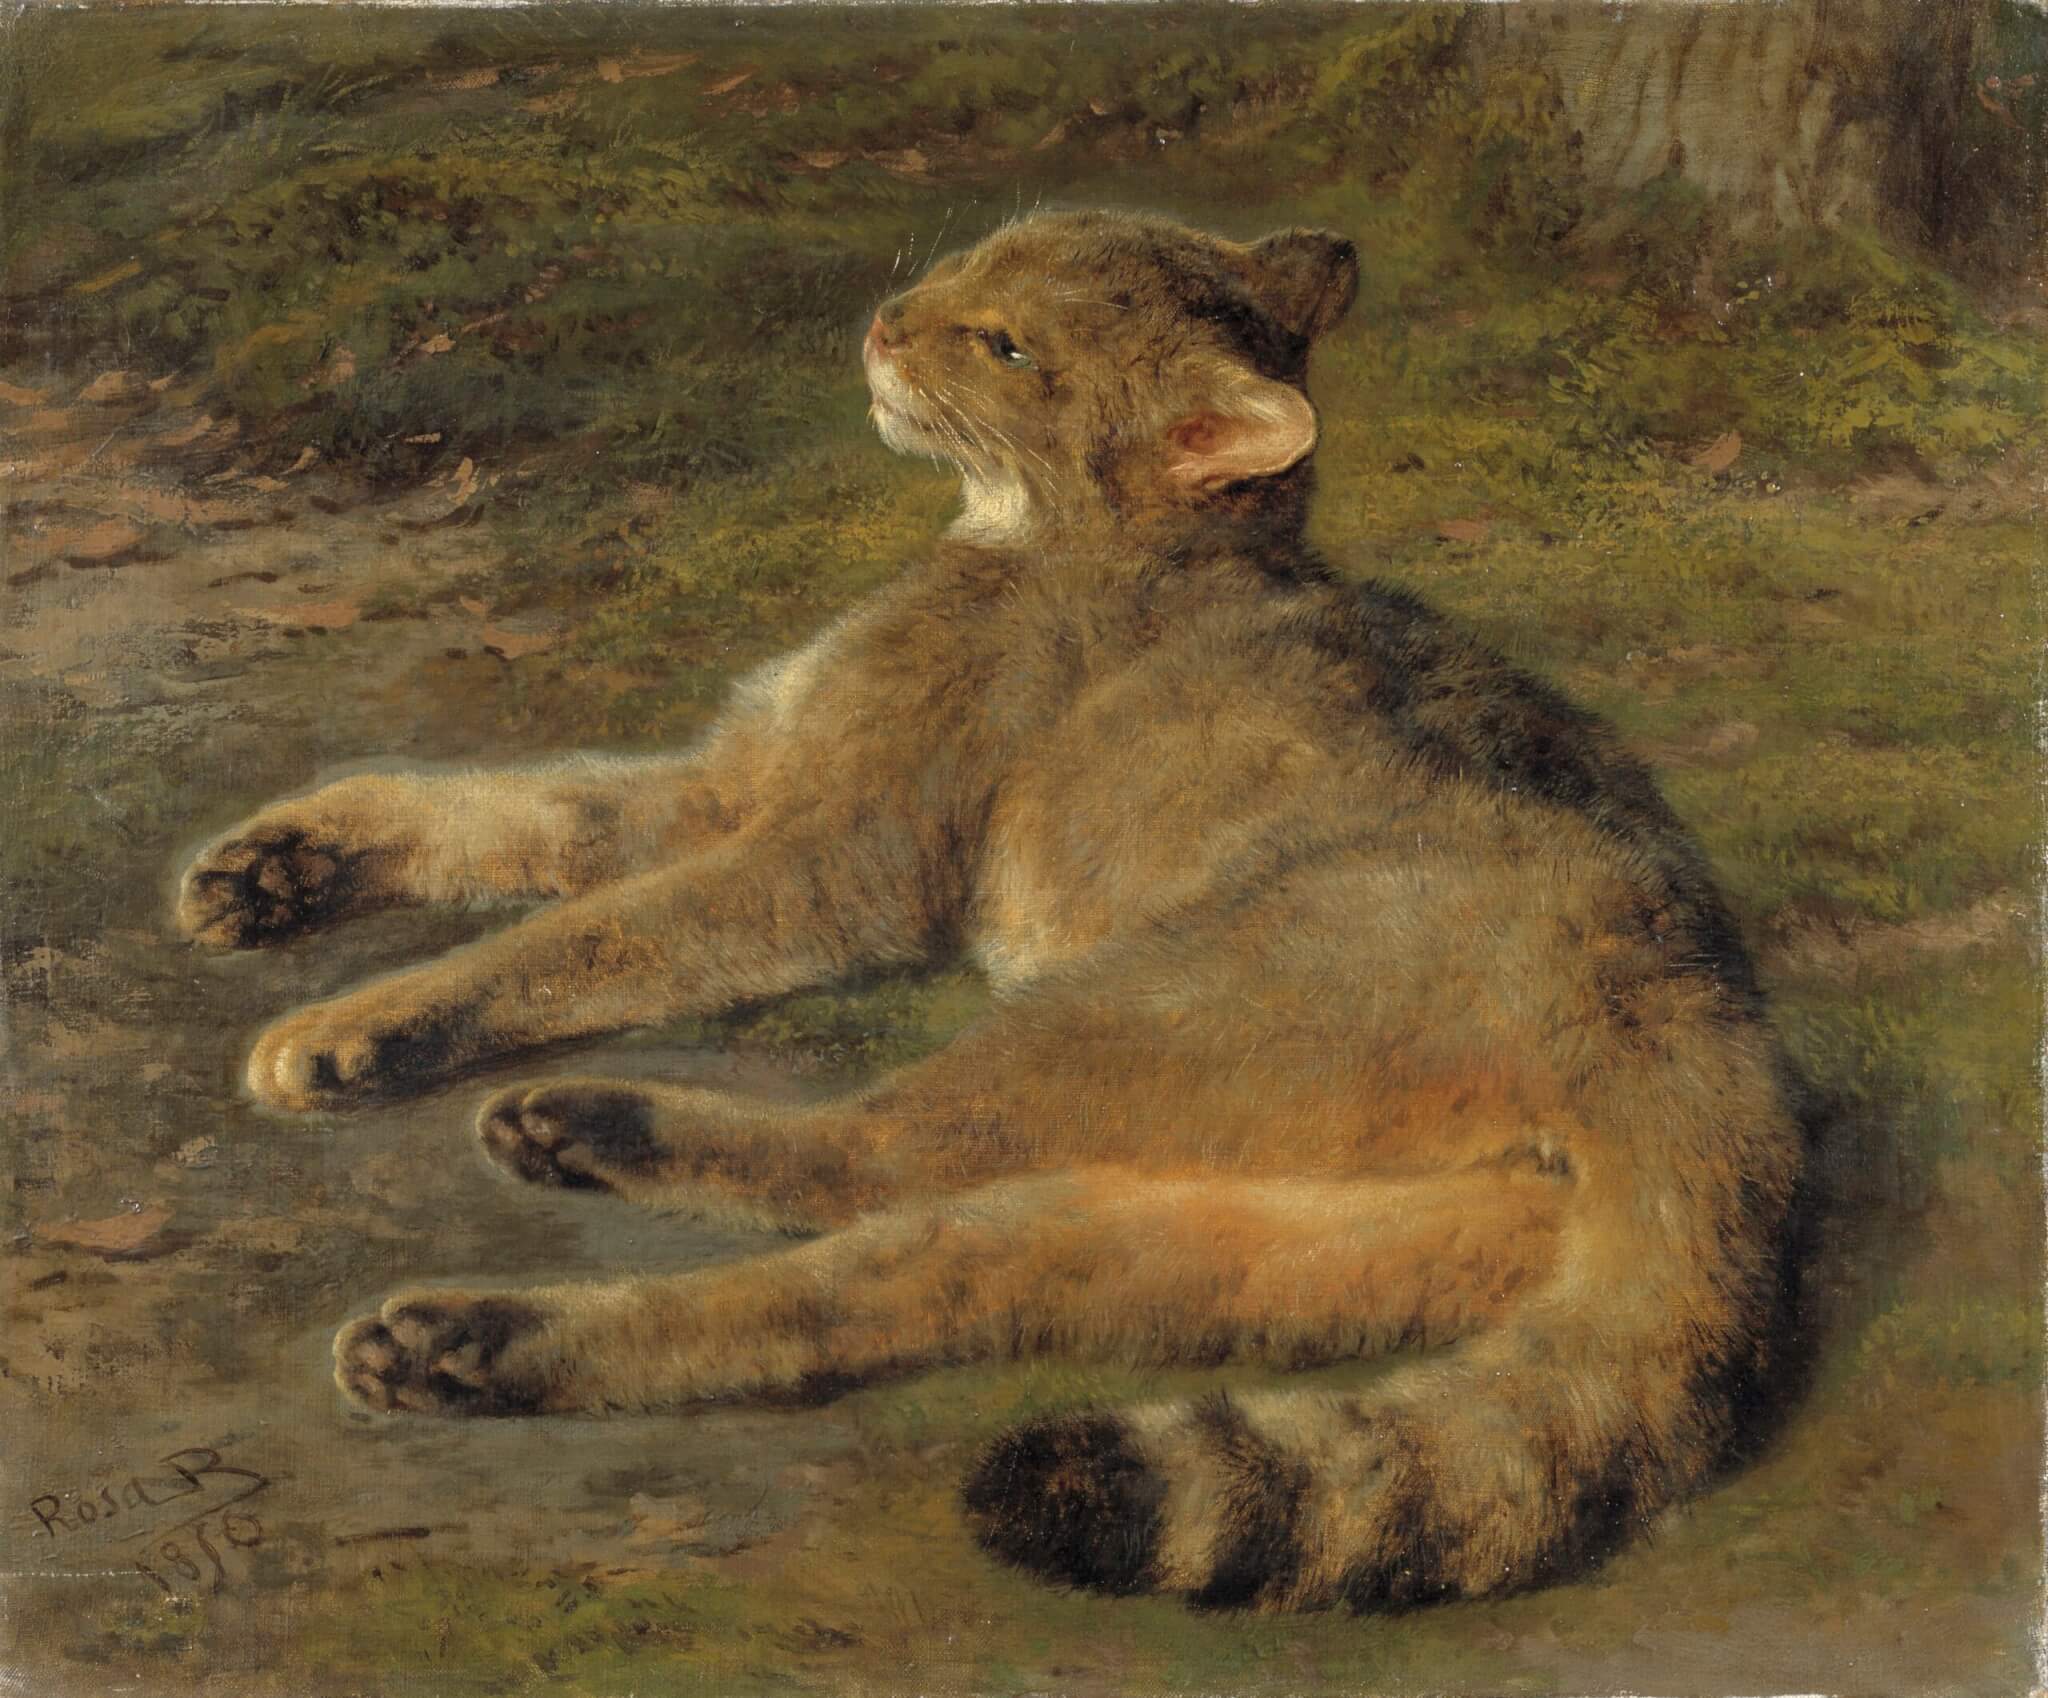 https://cms.eventail.be/wp-content/uploads/2022/08/12.-Rosa_Bonheur_Chat-Sauvage-_Nationalmuseum_-_19965-scaled.jpg